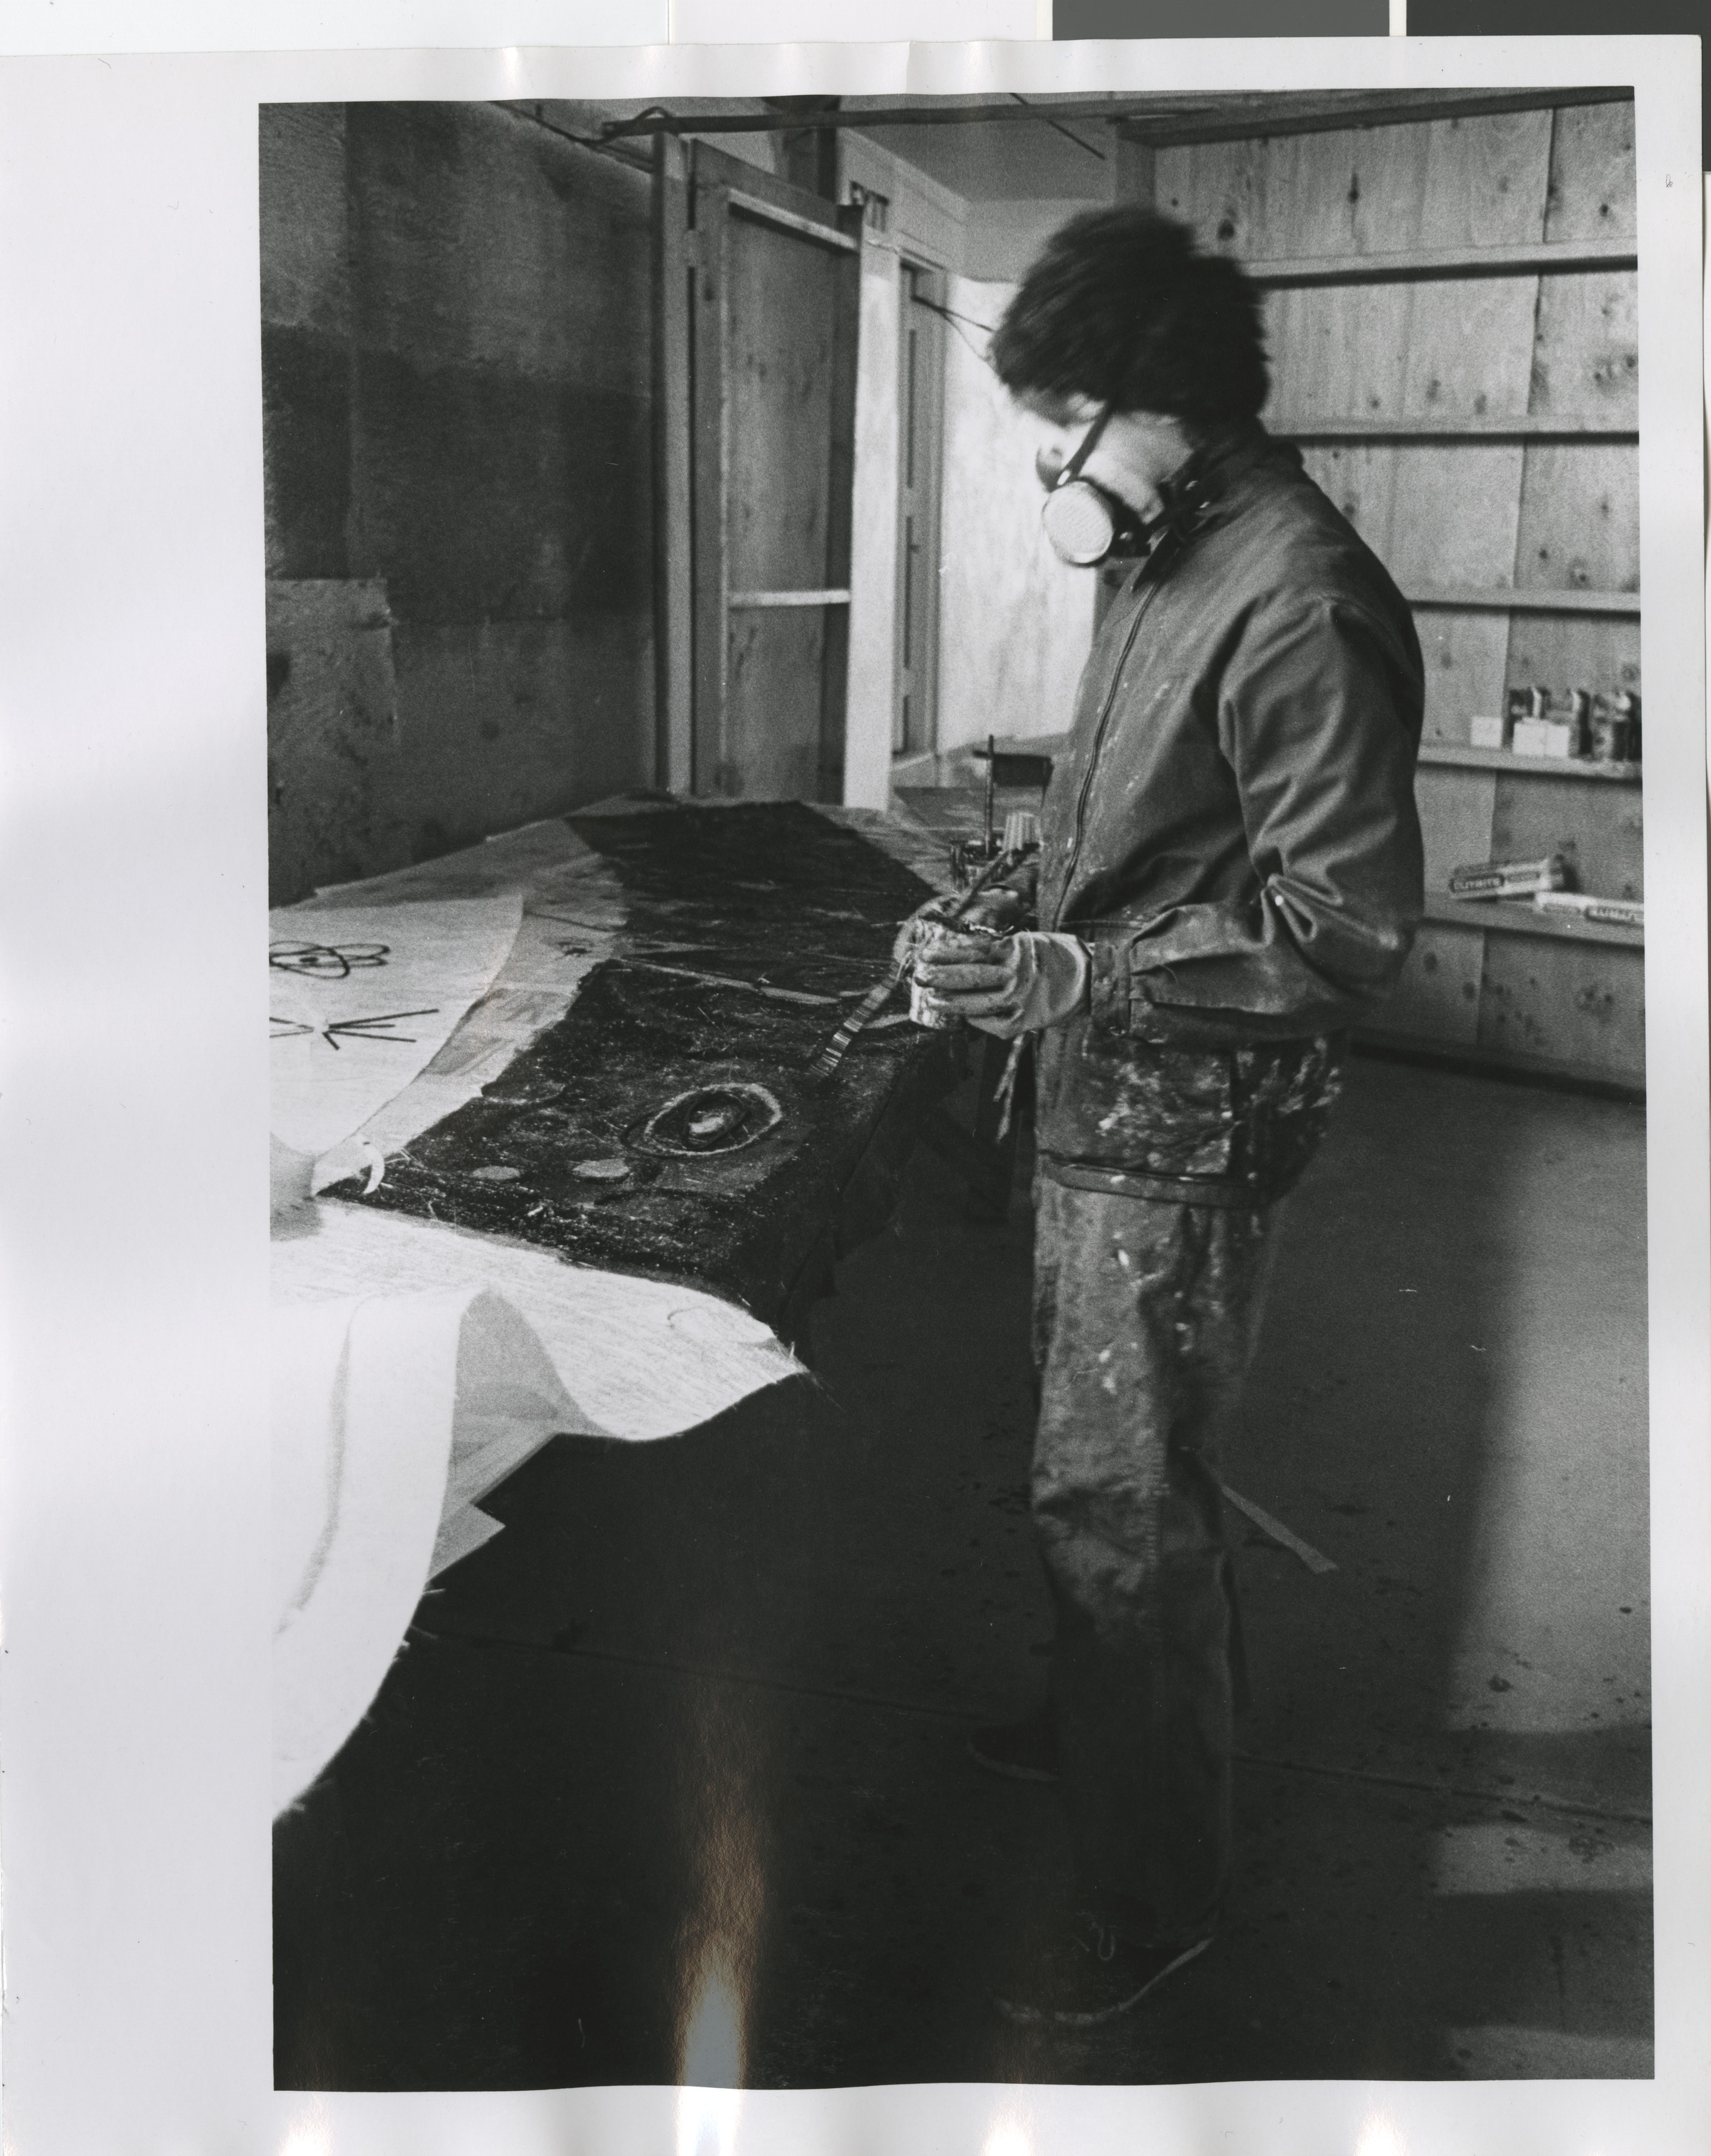 Photograph of Rita Deanin Abbey working on Temple Beth Sholom resin mural, 1970s